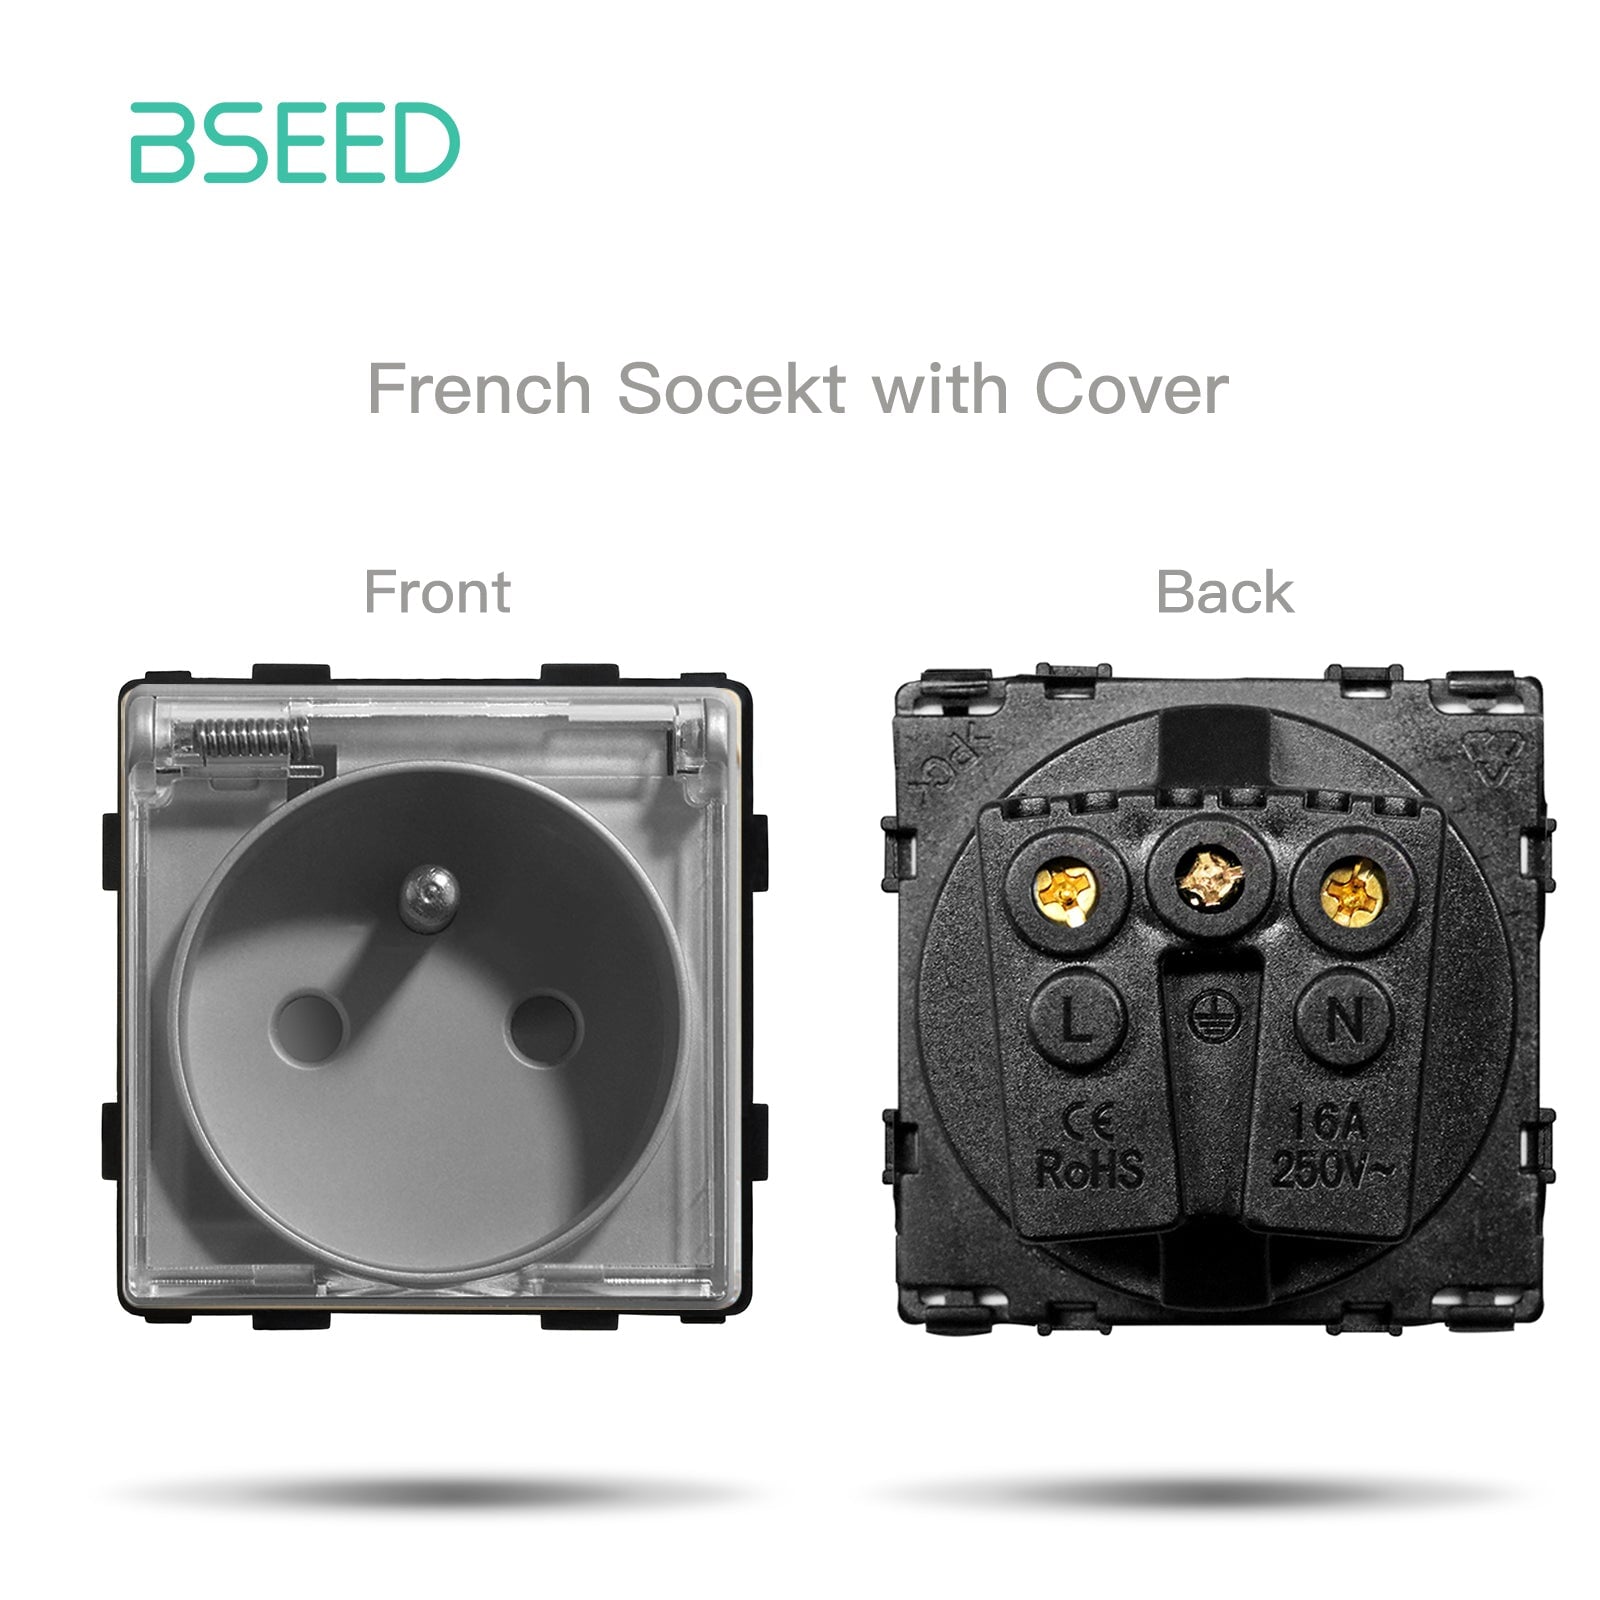 BSEED EU standard Function Key Cover Socket DIY Parts Power Outlets & Sockets Bseedswitch 